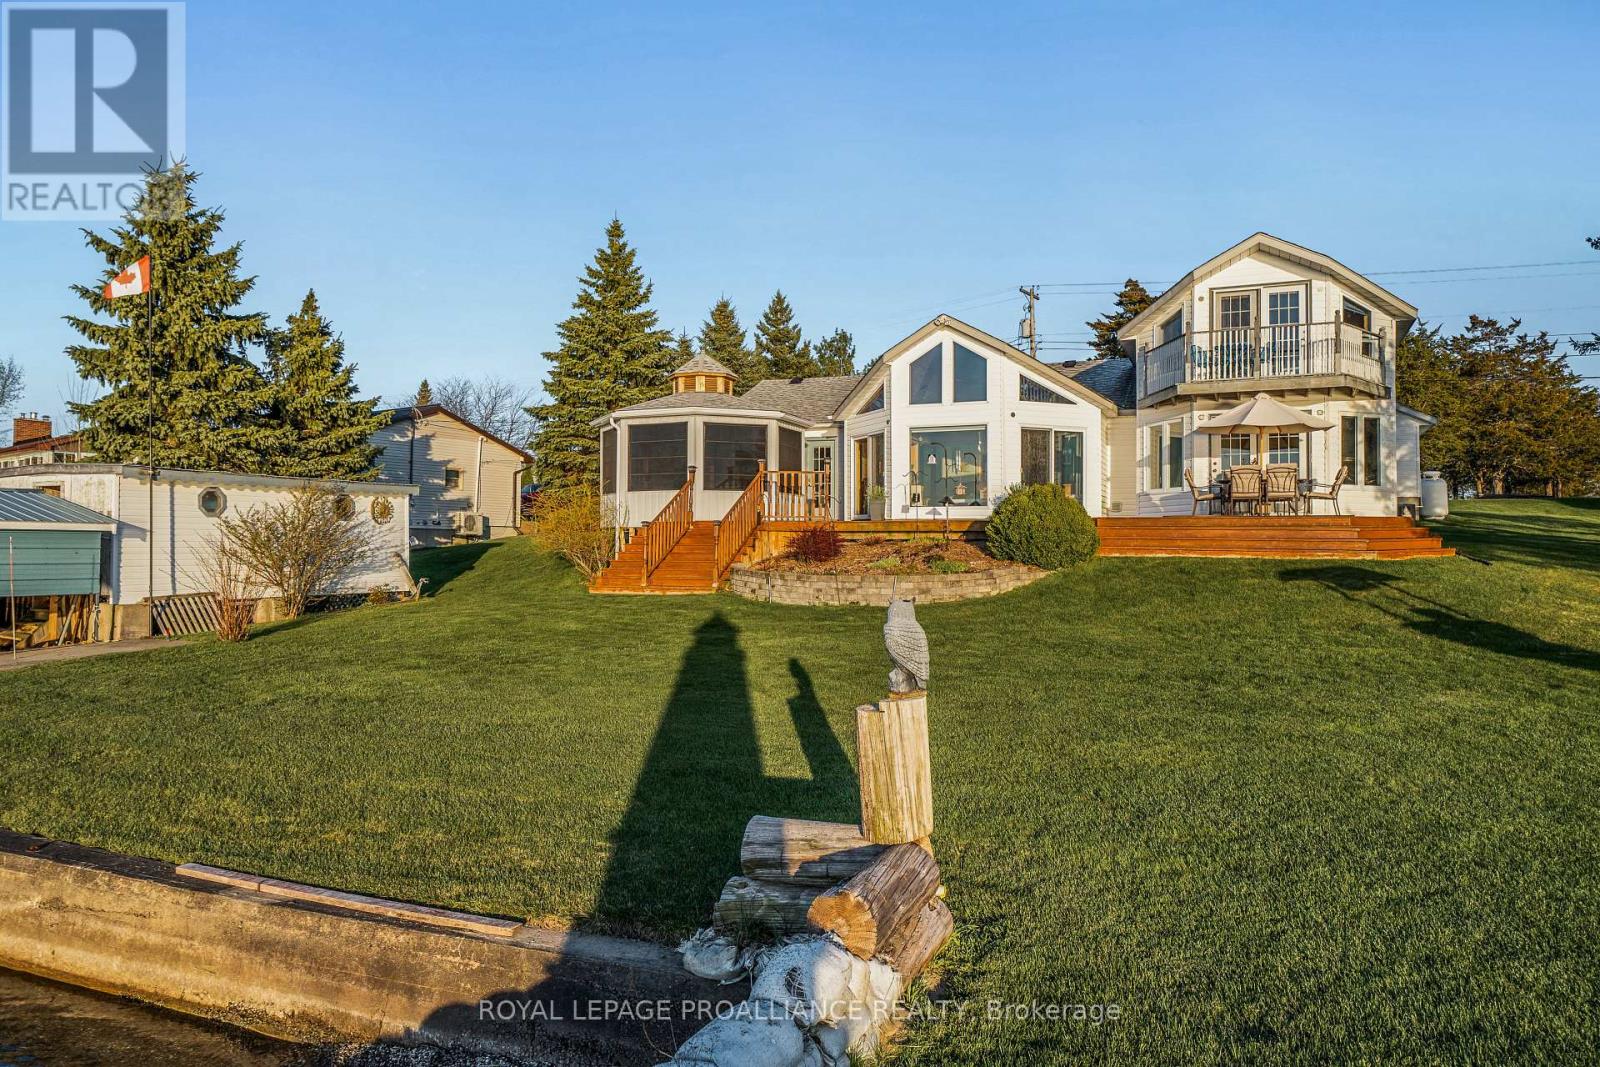 45 PEATS POINT RD Prince Edward County